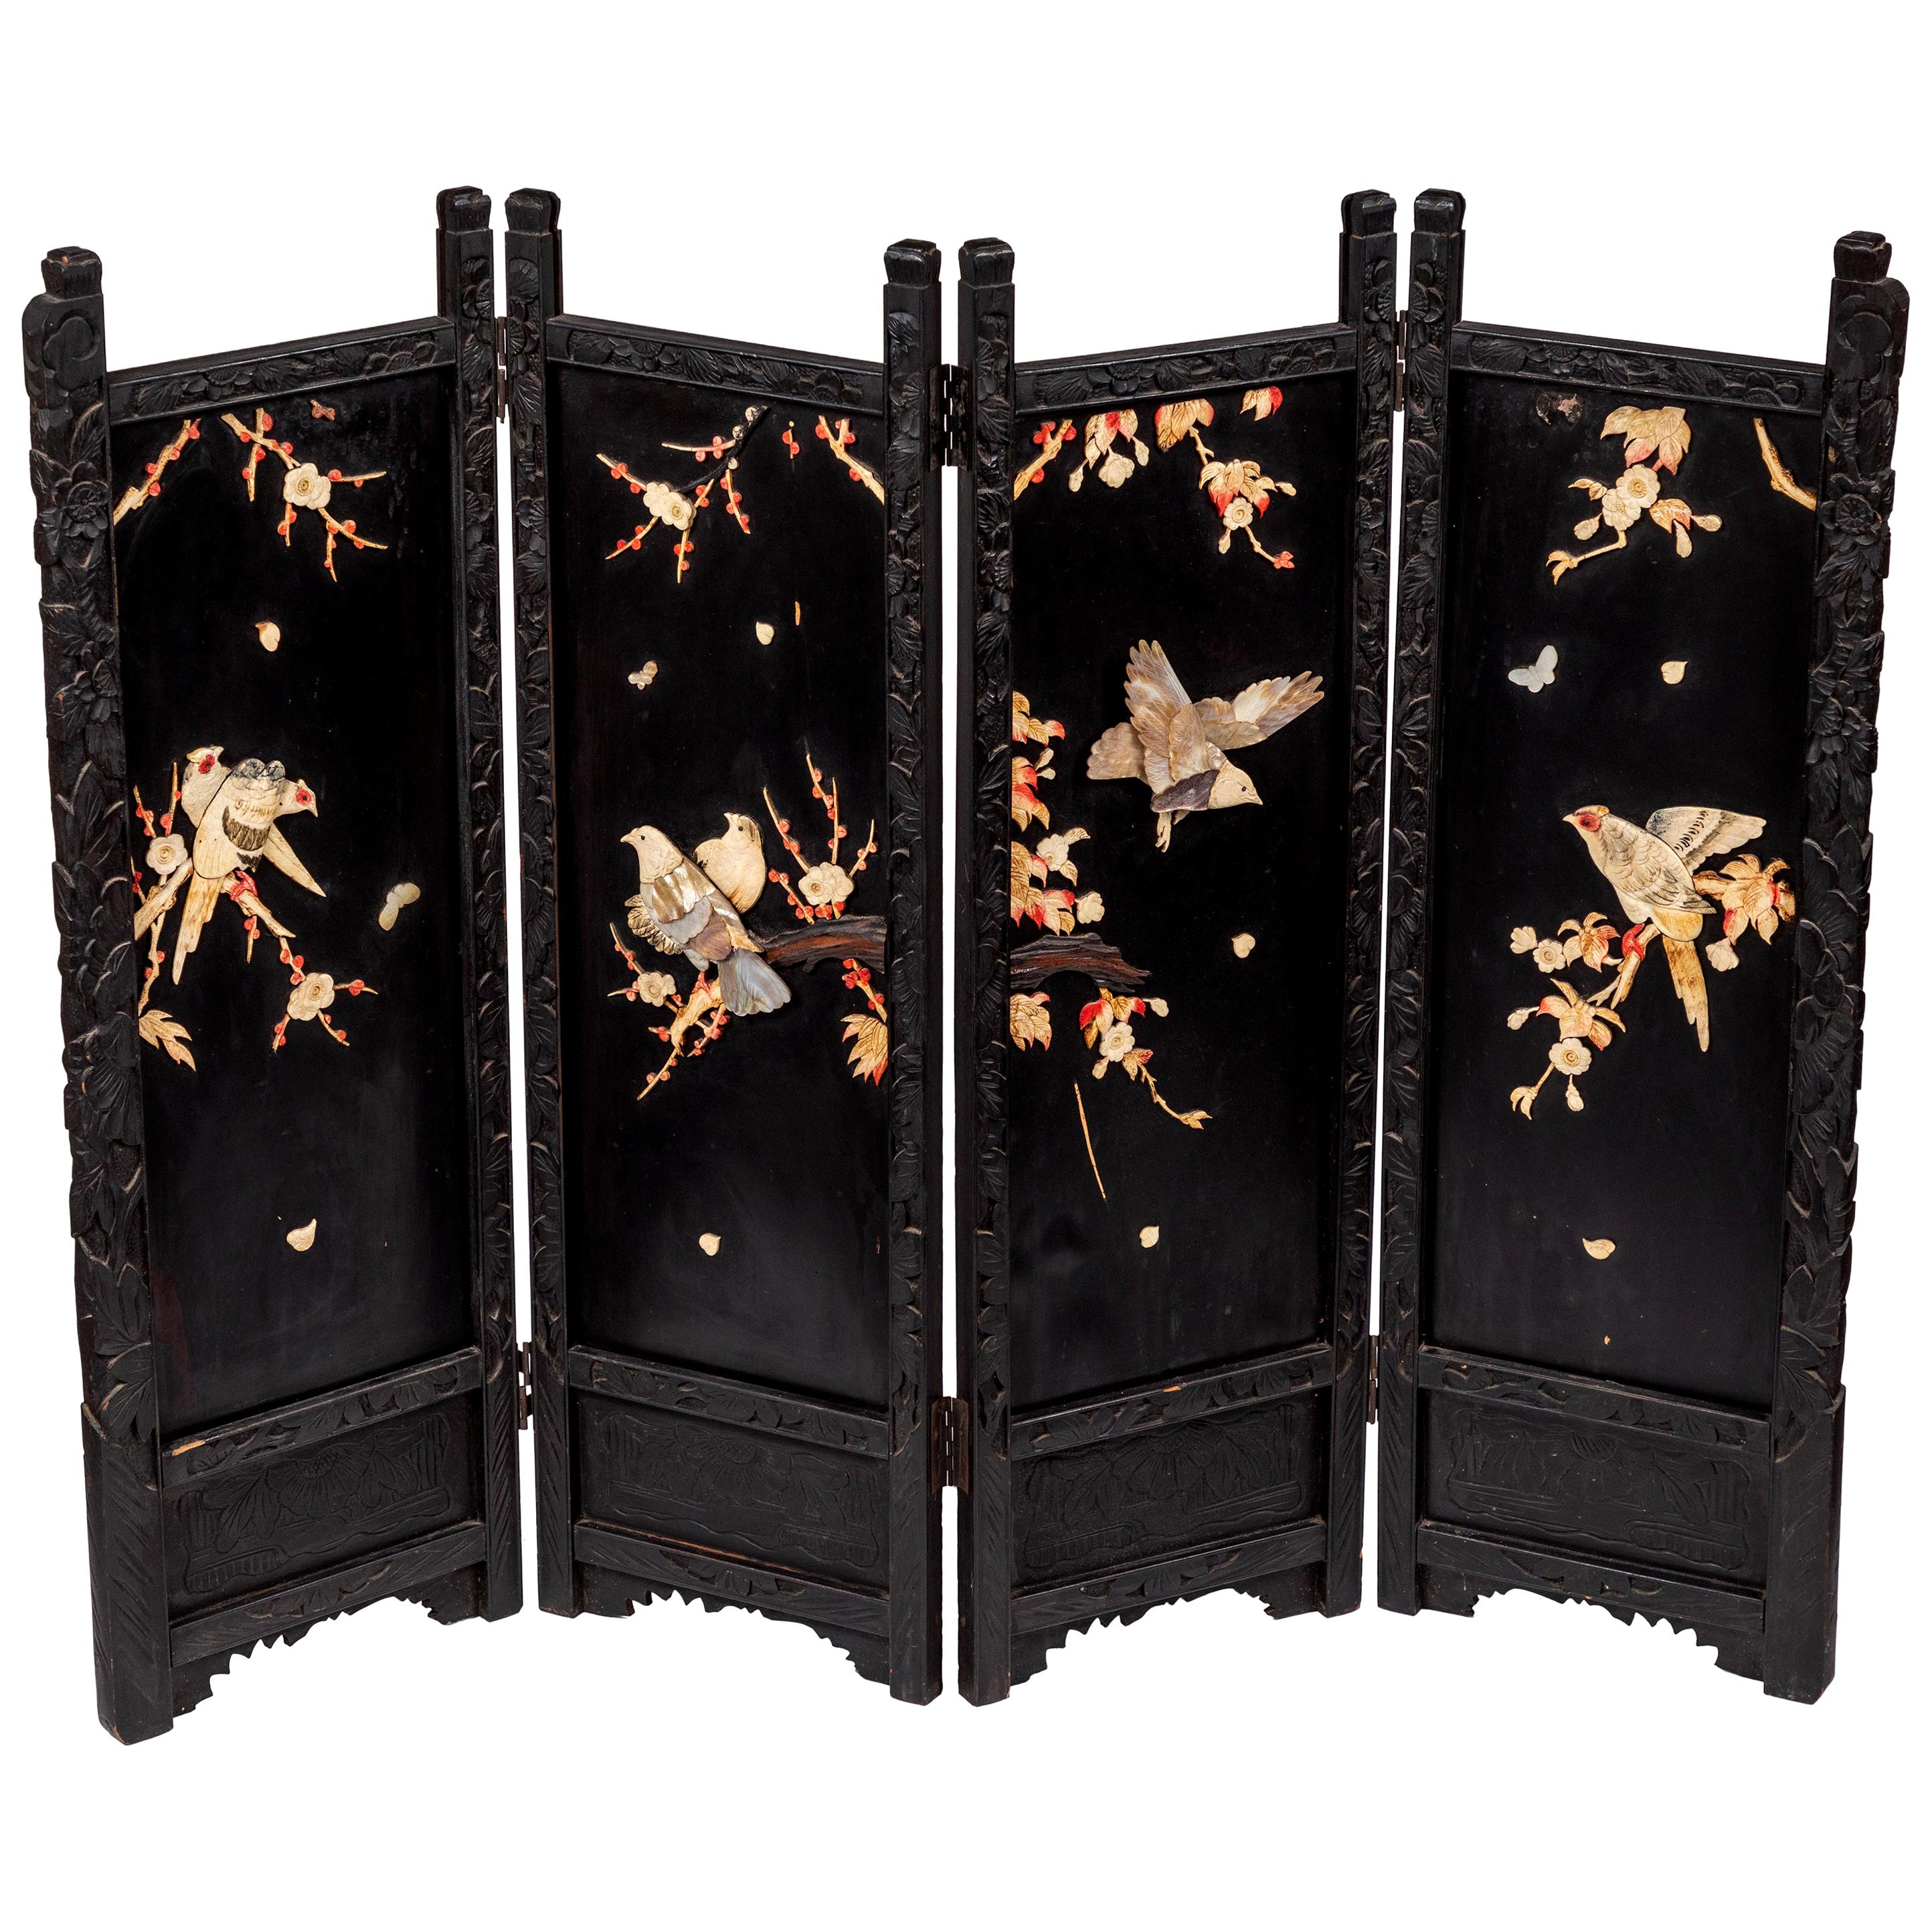 Black lacquer panels decorated with carved Mother of Pearl + Bone Birds and cherry blossom branches.